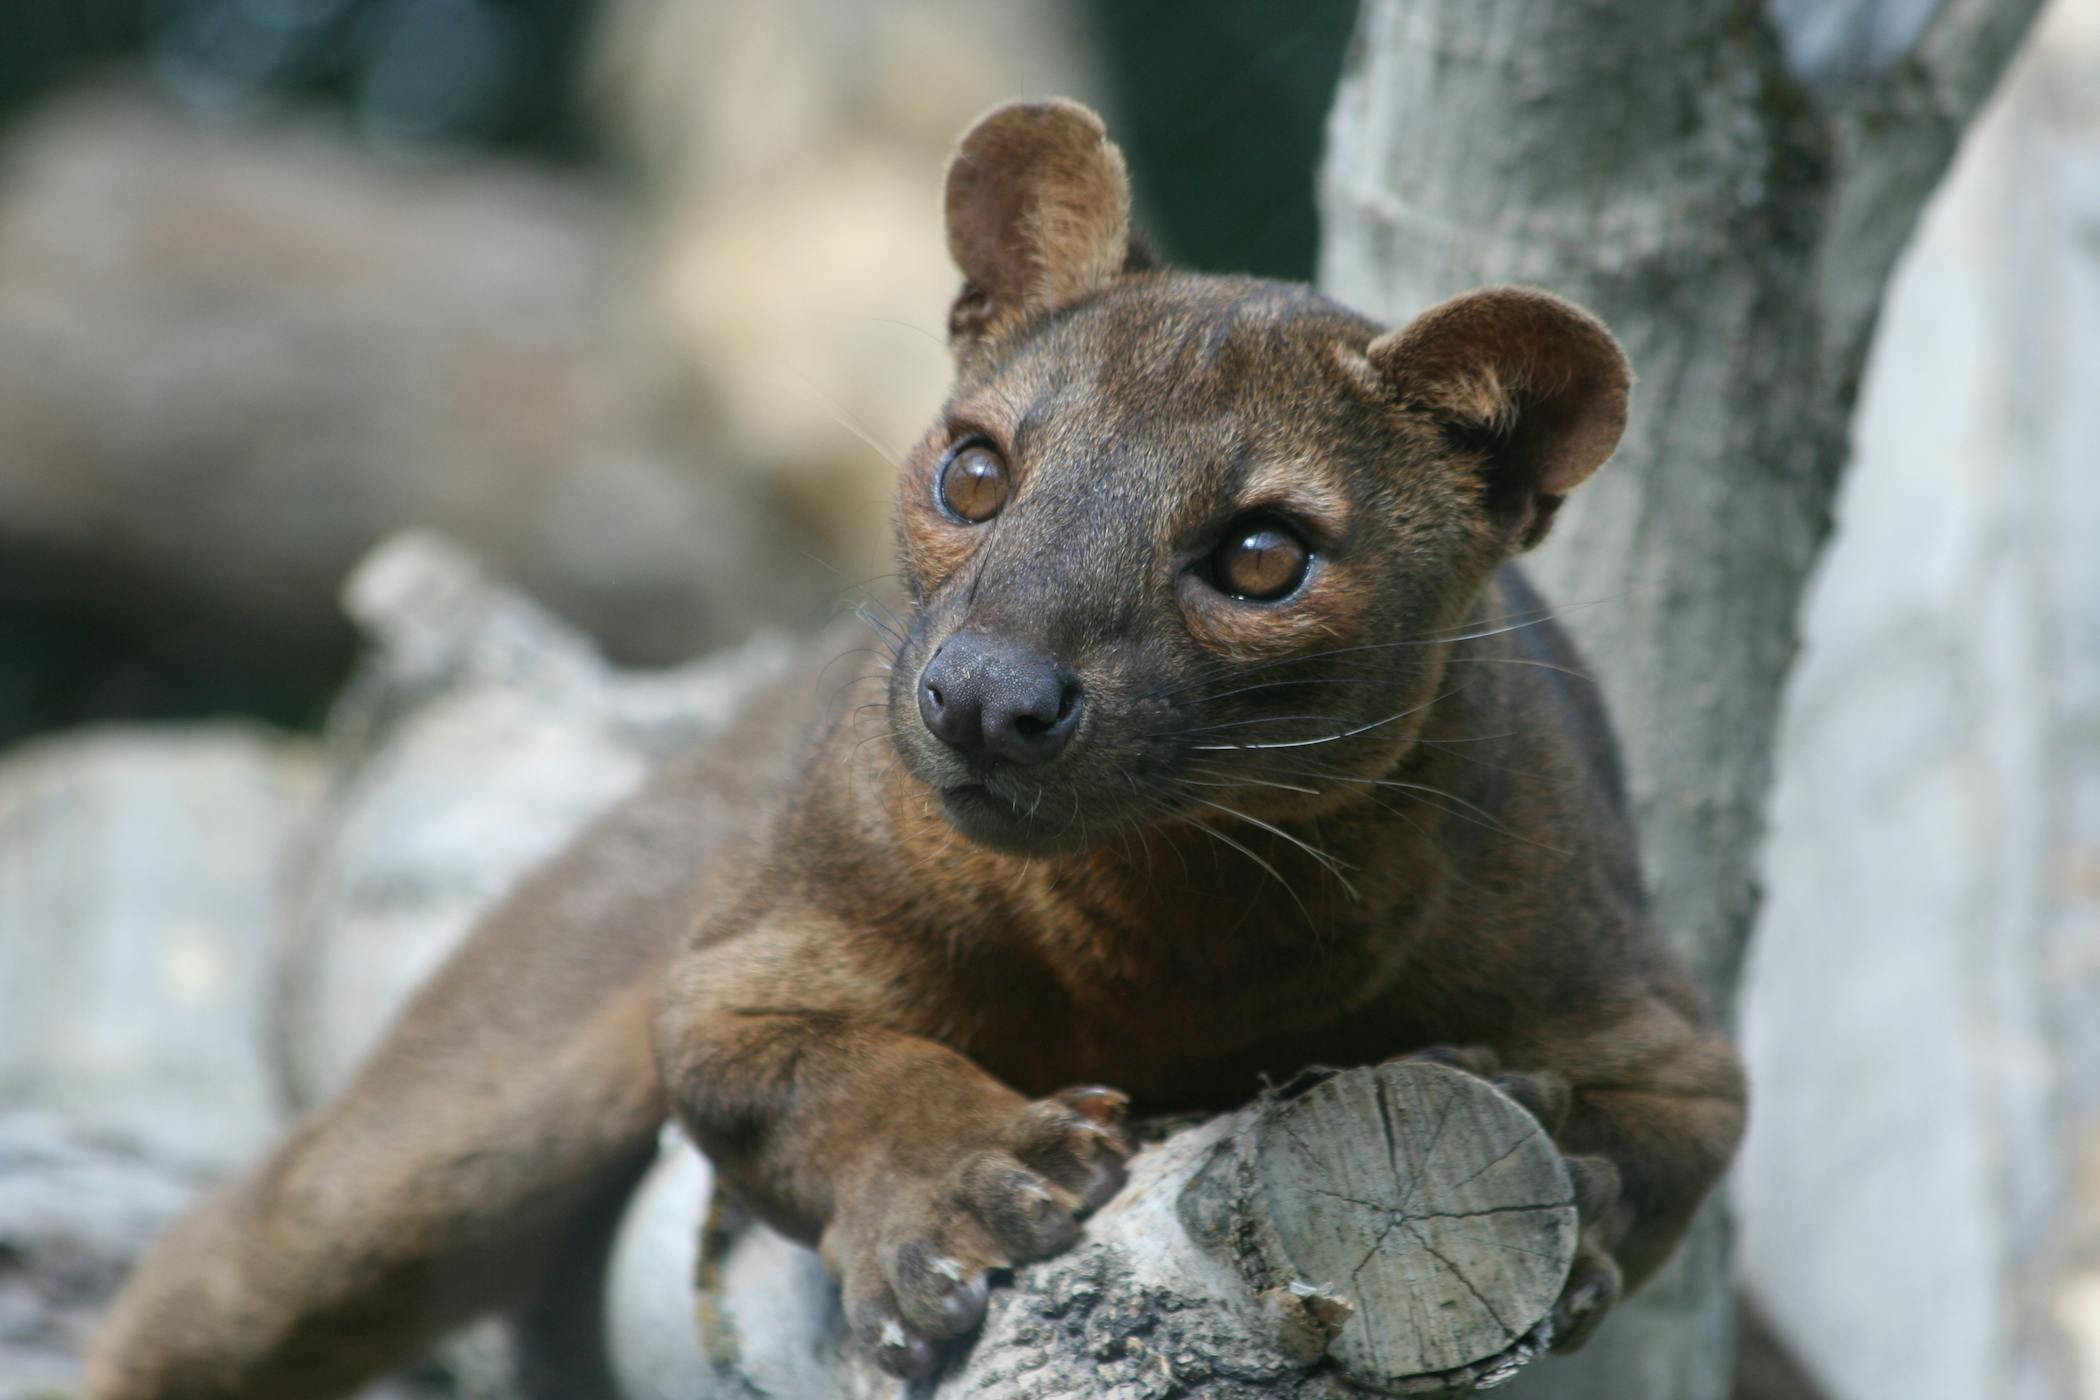 A fossa in the wild: one of the most elusive of Madagascar's residents!